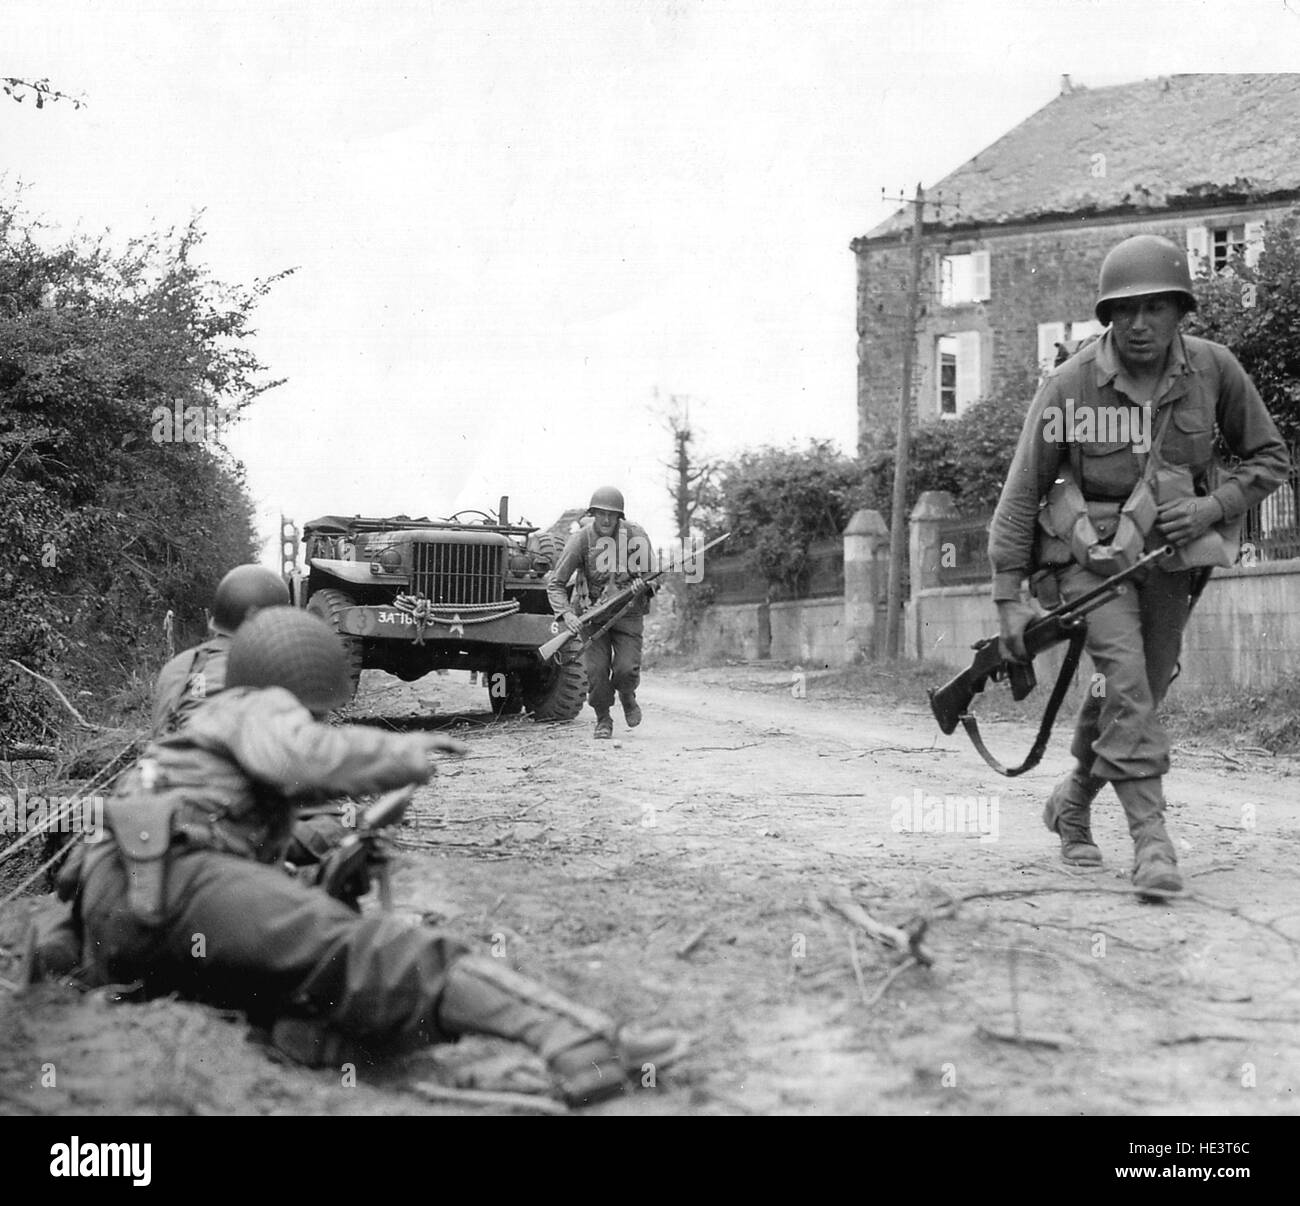 Normandy, France, June 1944. Allied soldiers fighting in the countryside and in the villages of Normandy. World War II Stock Photo